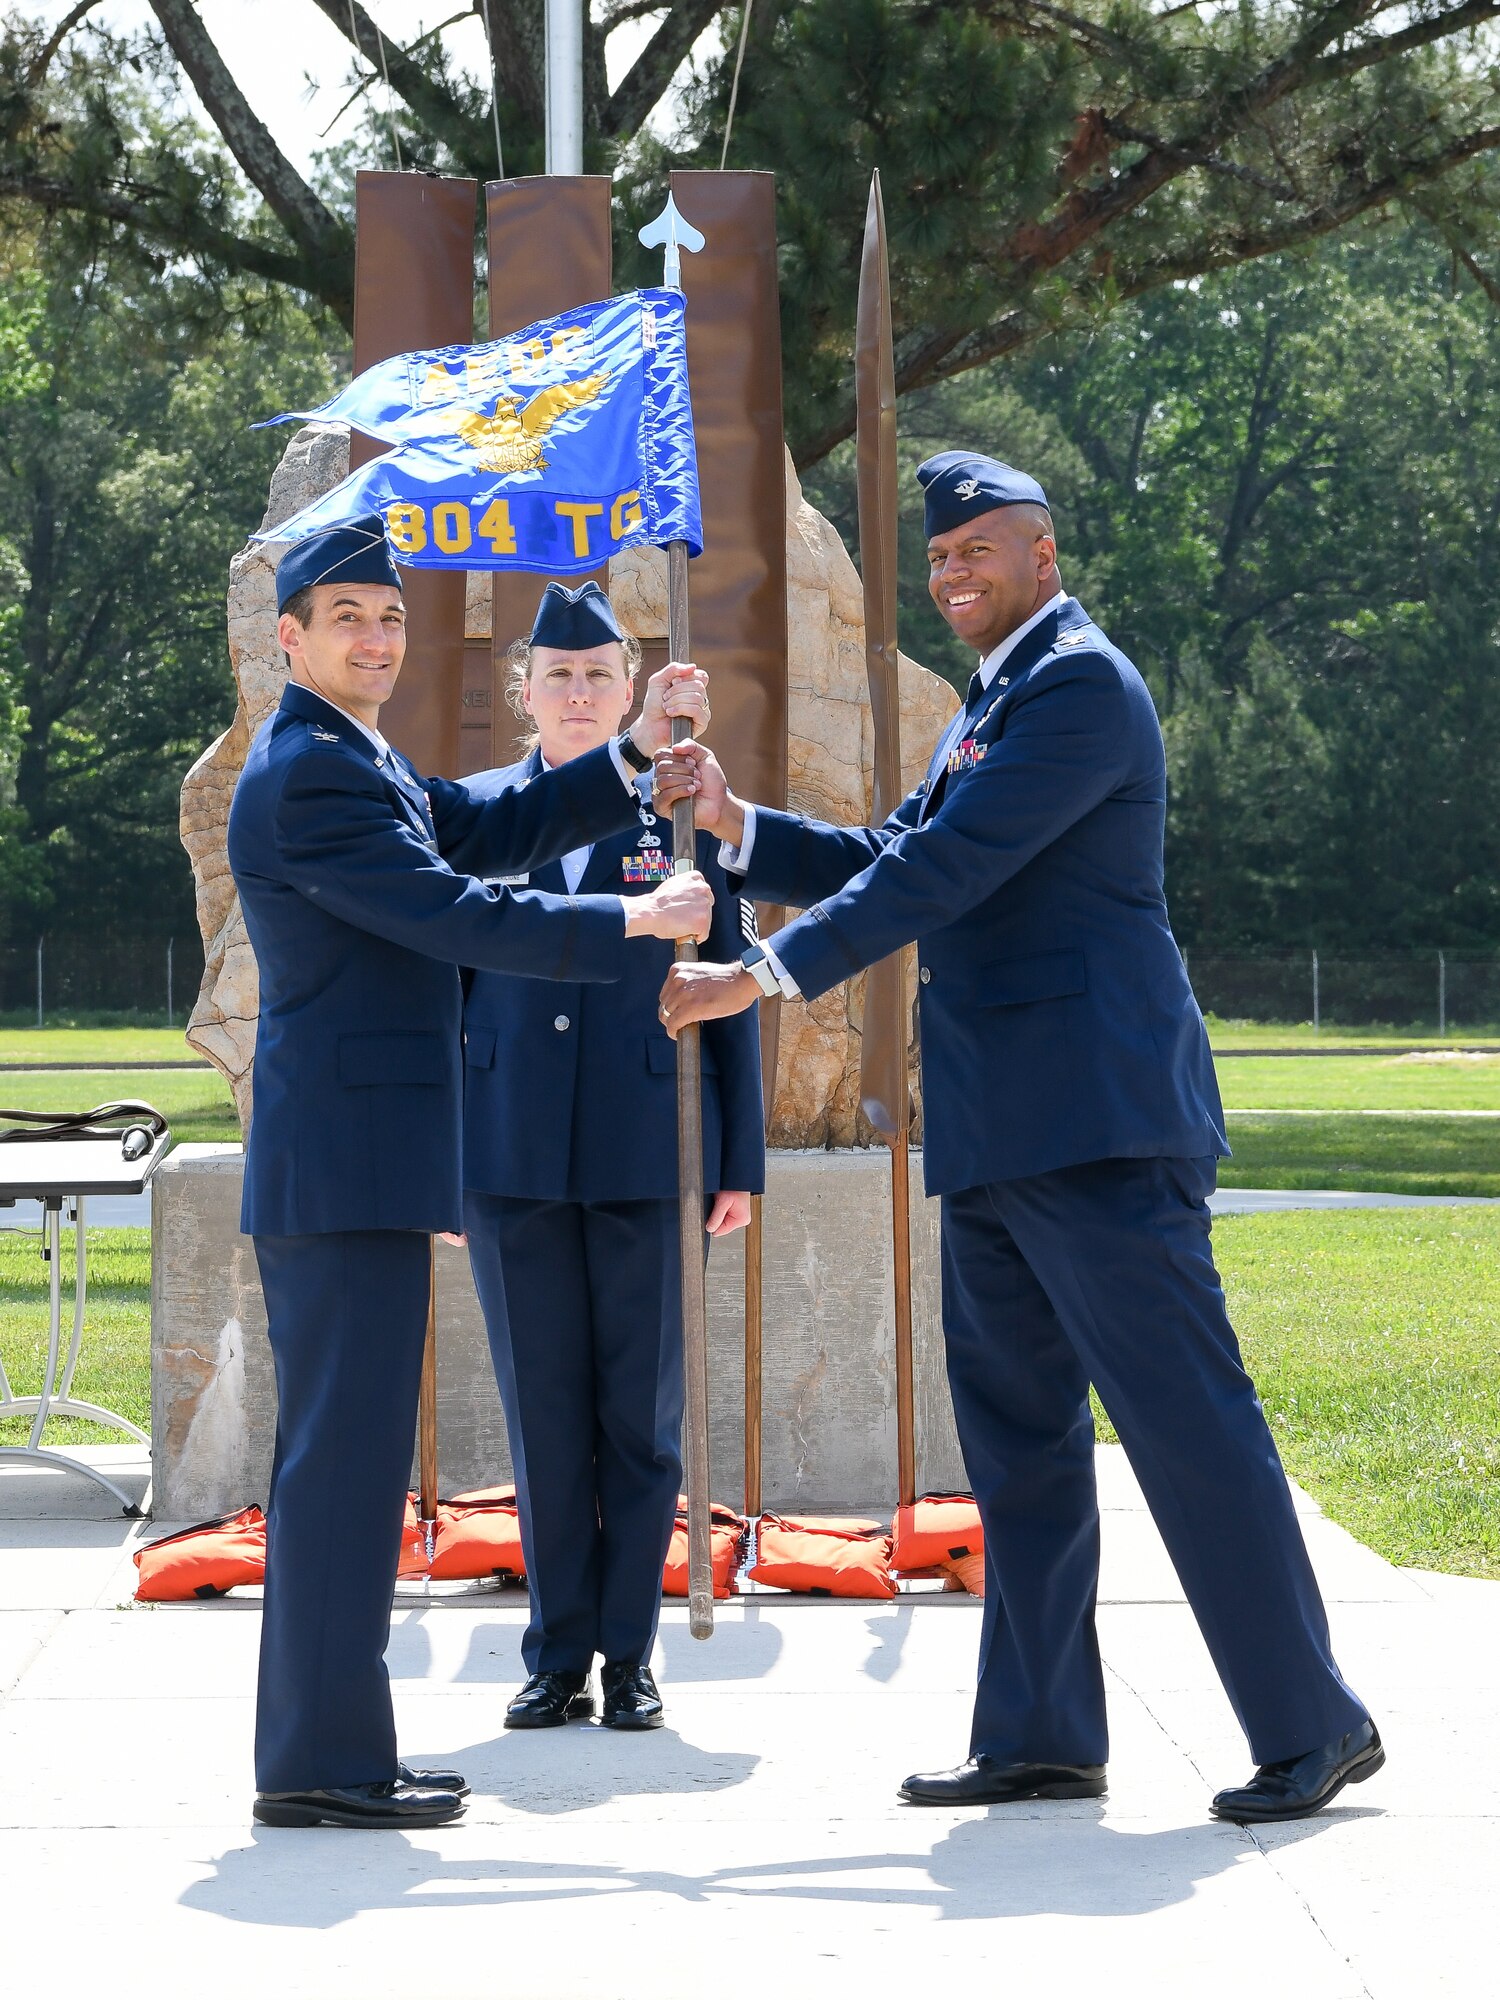 Col. Jeffrey Geraghty, left, AEDC commander, passes the guidon of the newly-activated 804th Test Group to Col. Lincoln Bonner as Bonner assumes command of the 804 TG during an activation ceremony May 20, 2022, at Arnold Air Force Base, Tenn.